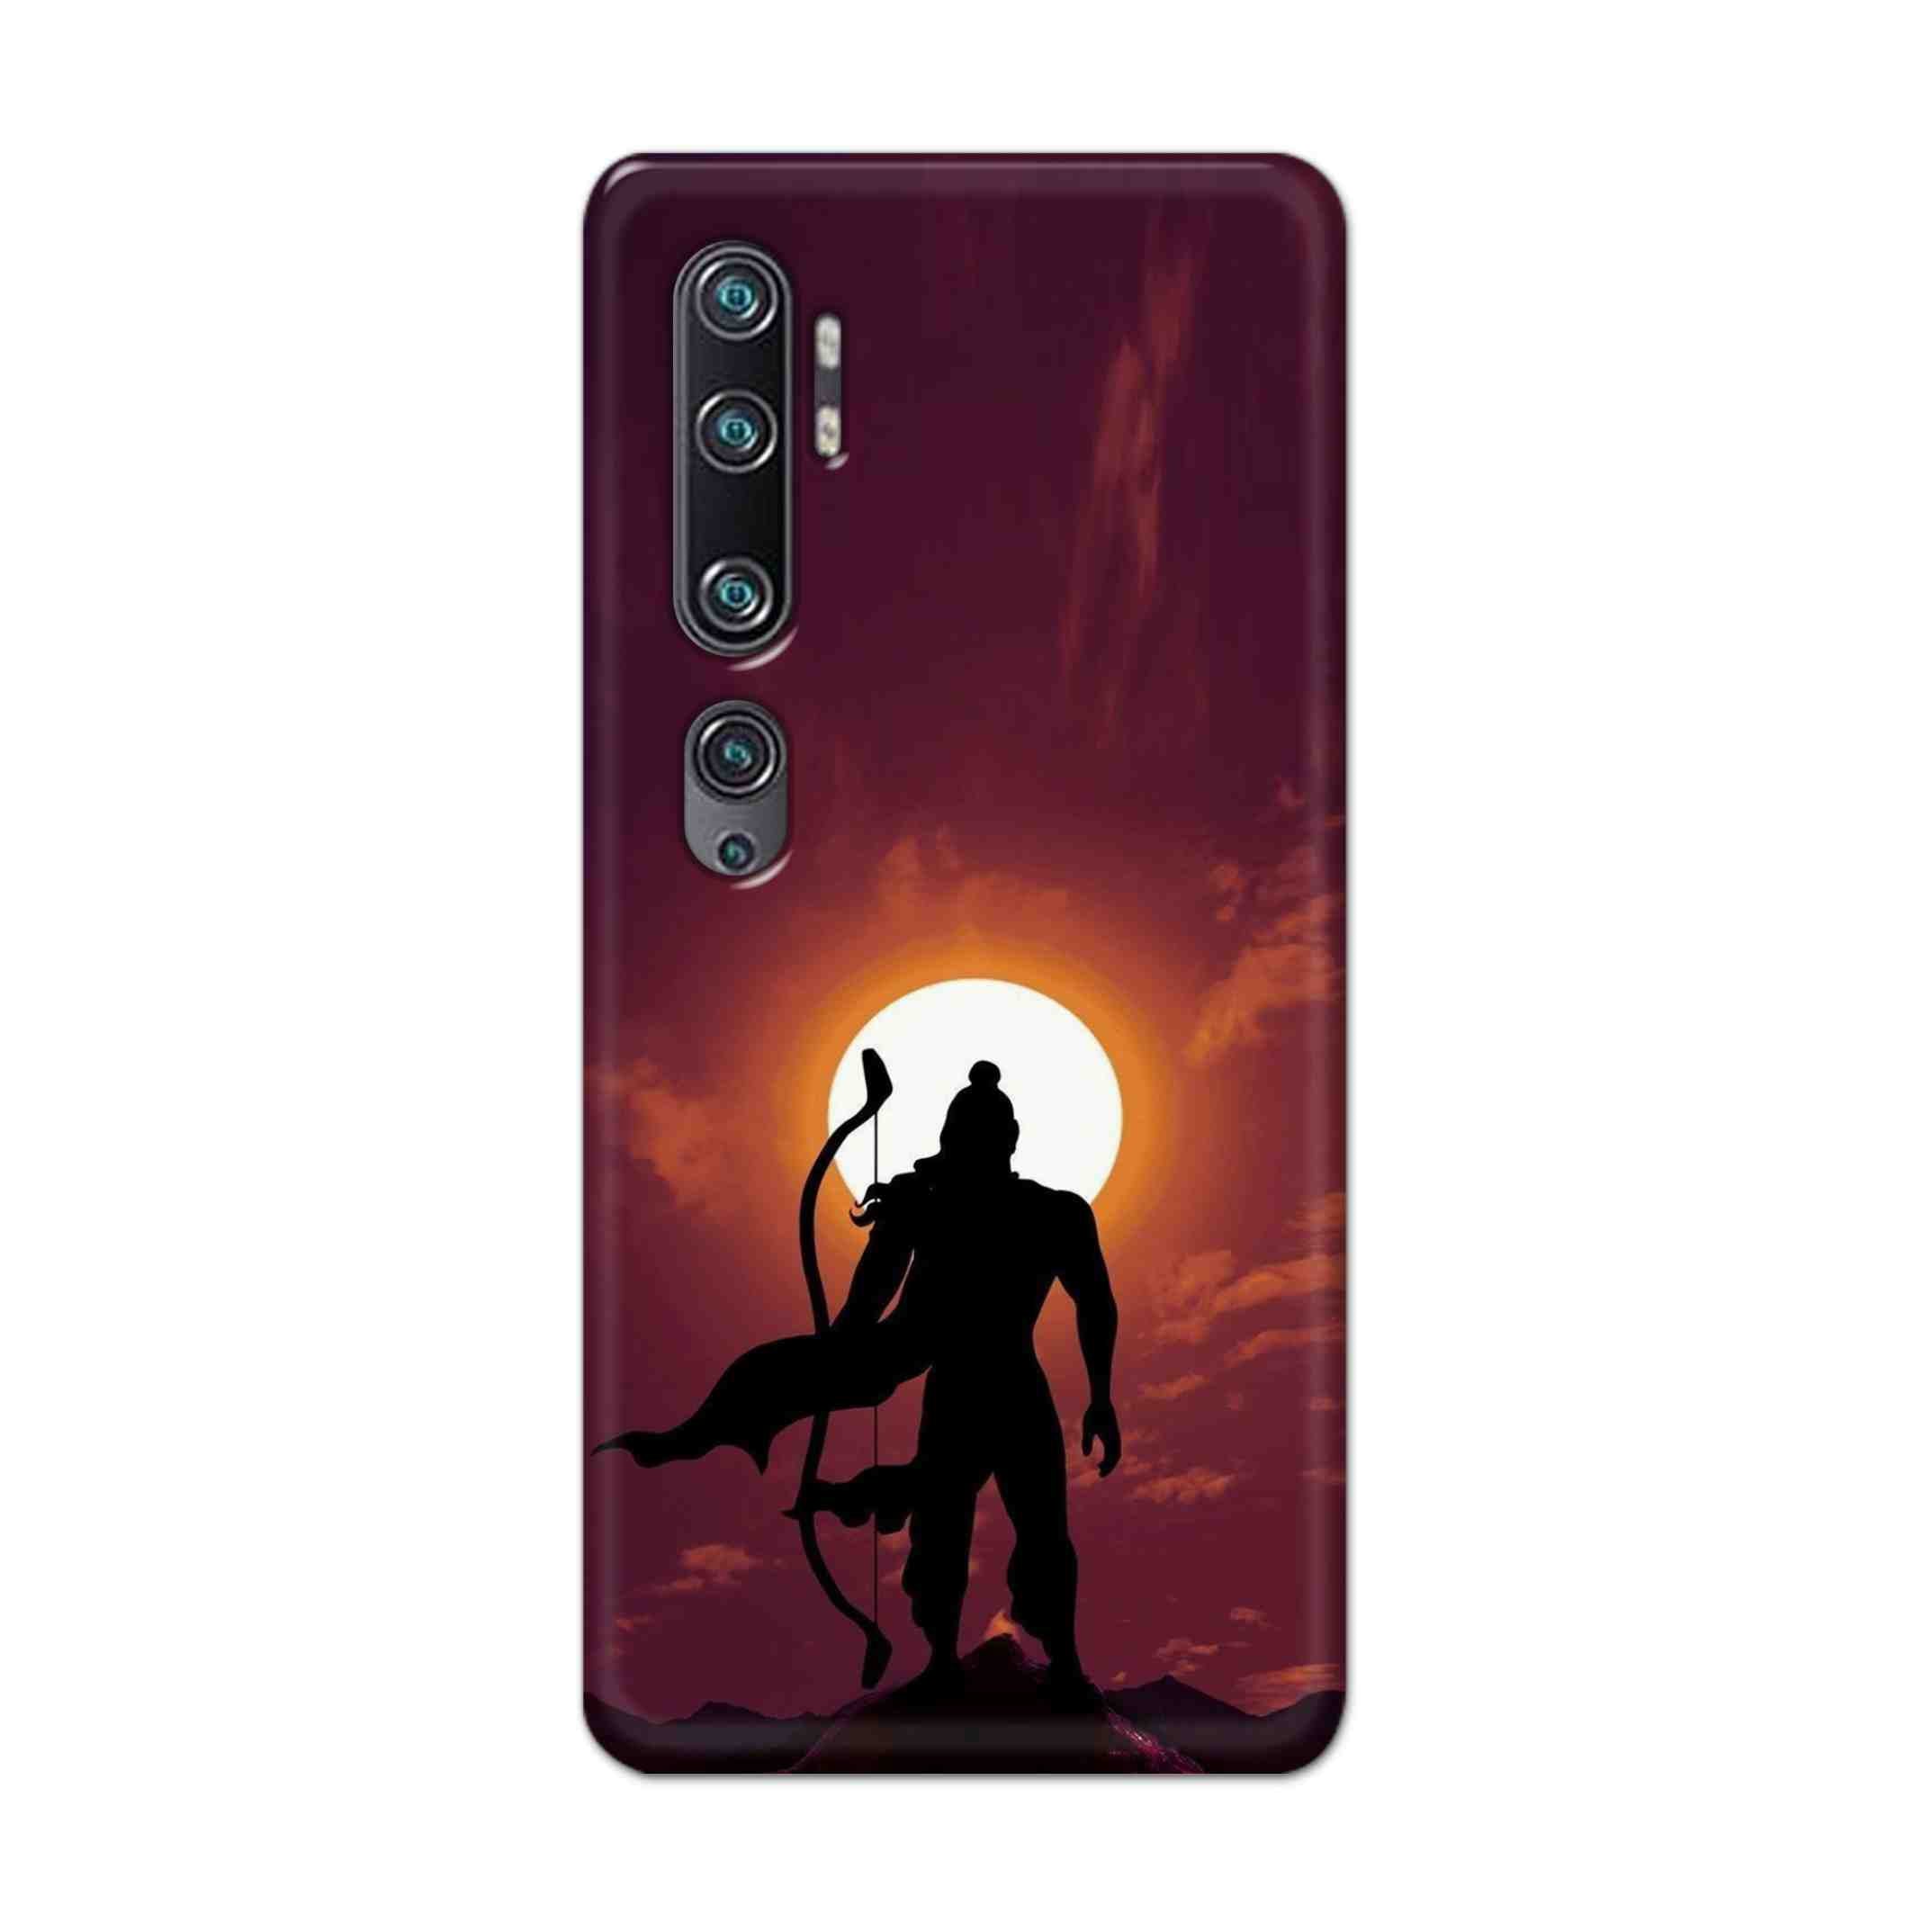 Buy Ram Hard Back Mobile Phone Case Cover For Xiaomi Mi Note 10 Online